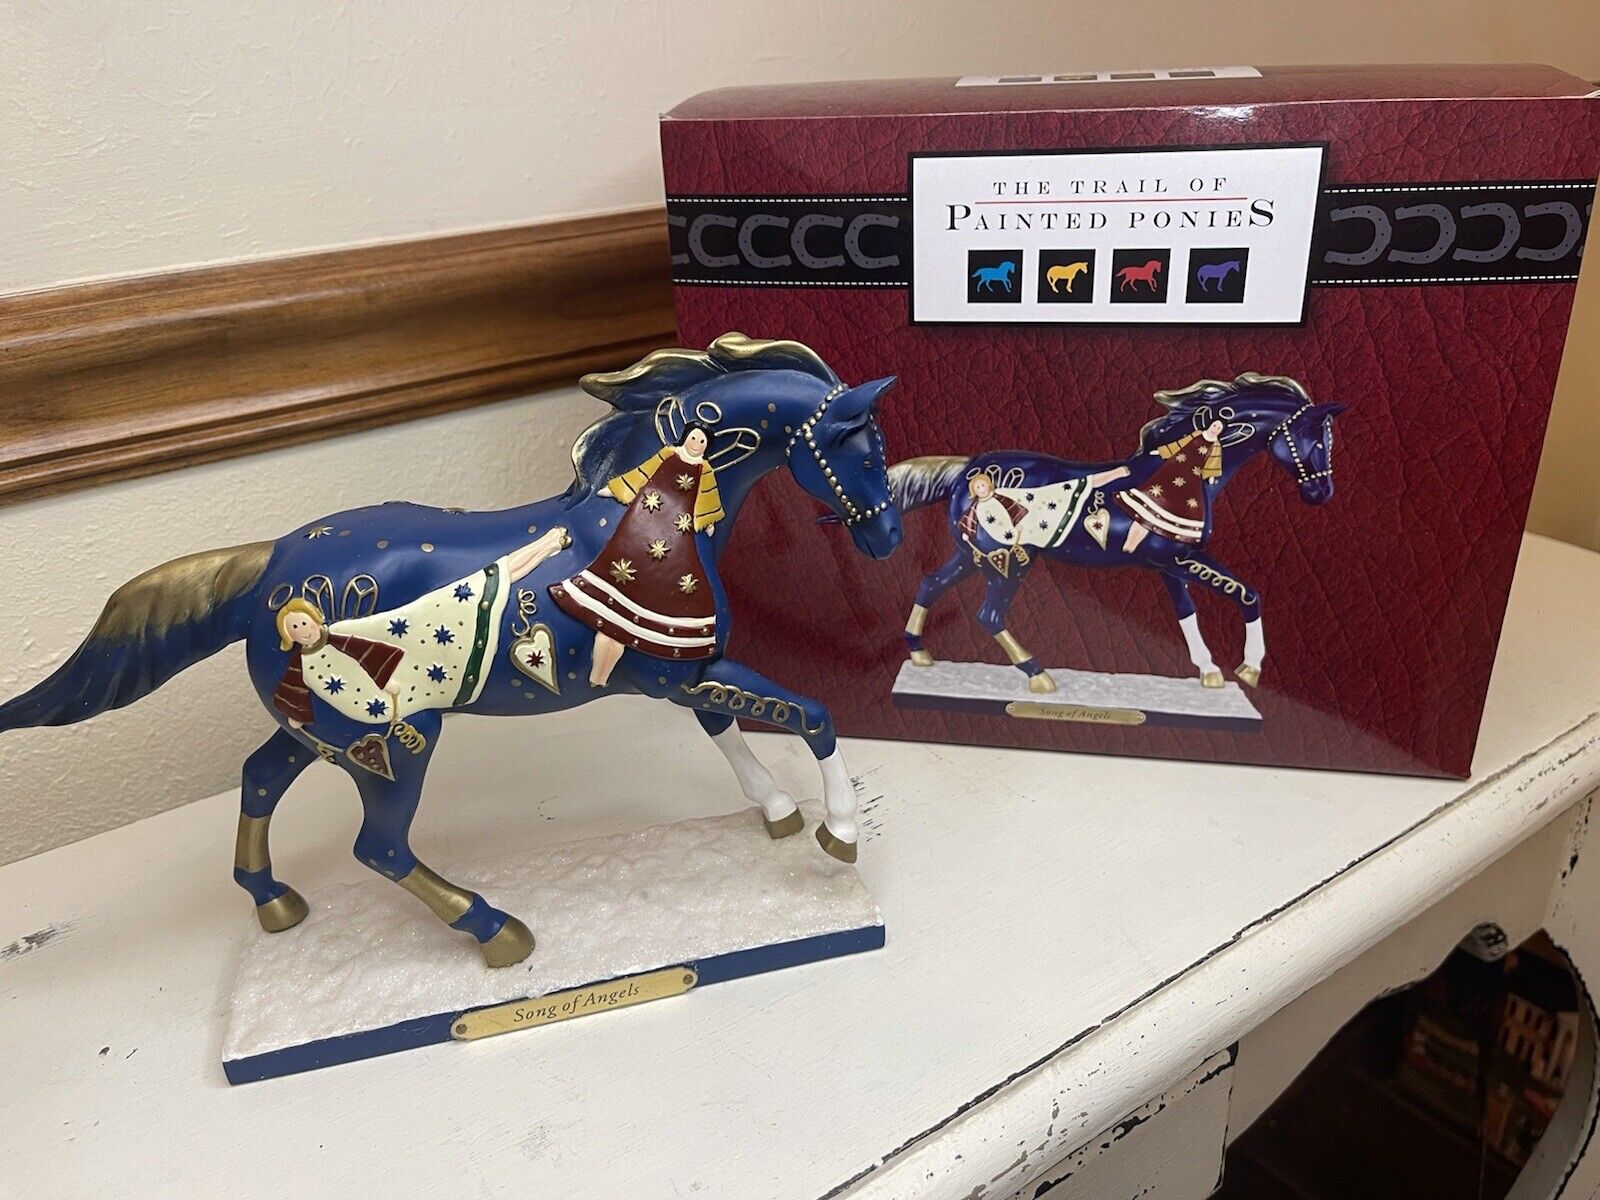 The Trail of Painted Ponies Song of Angels 2010–#4022393 1E/4188 RETIRED 03/2014